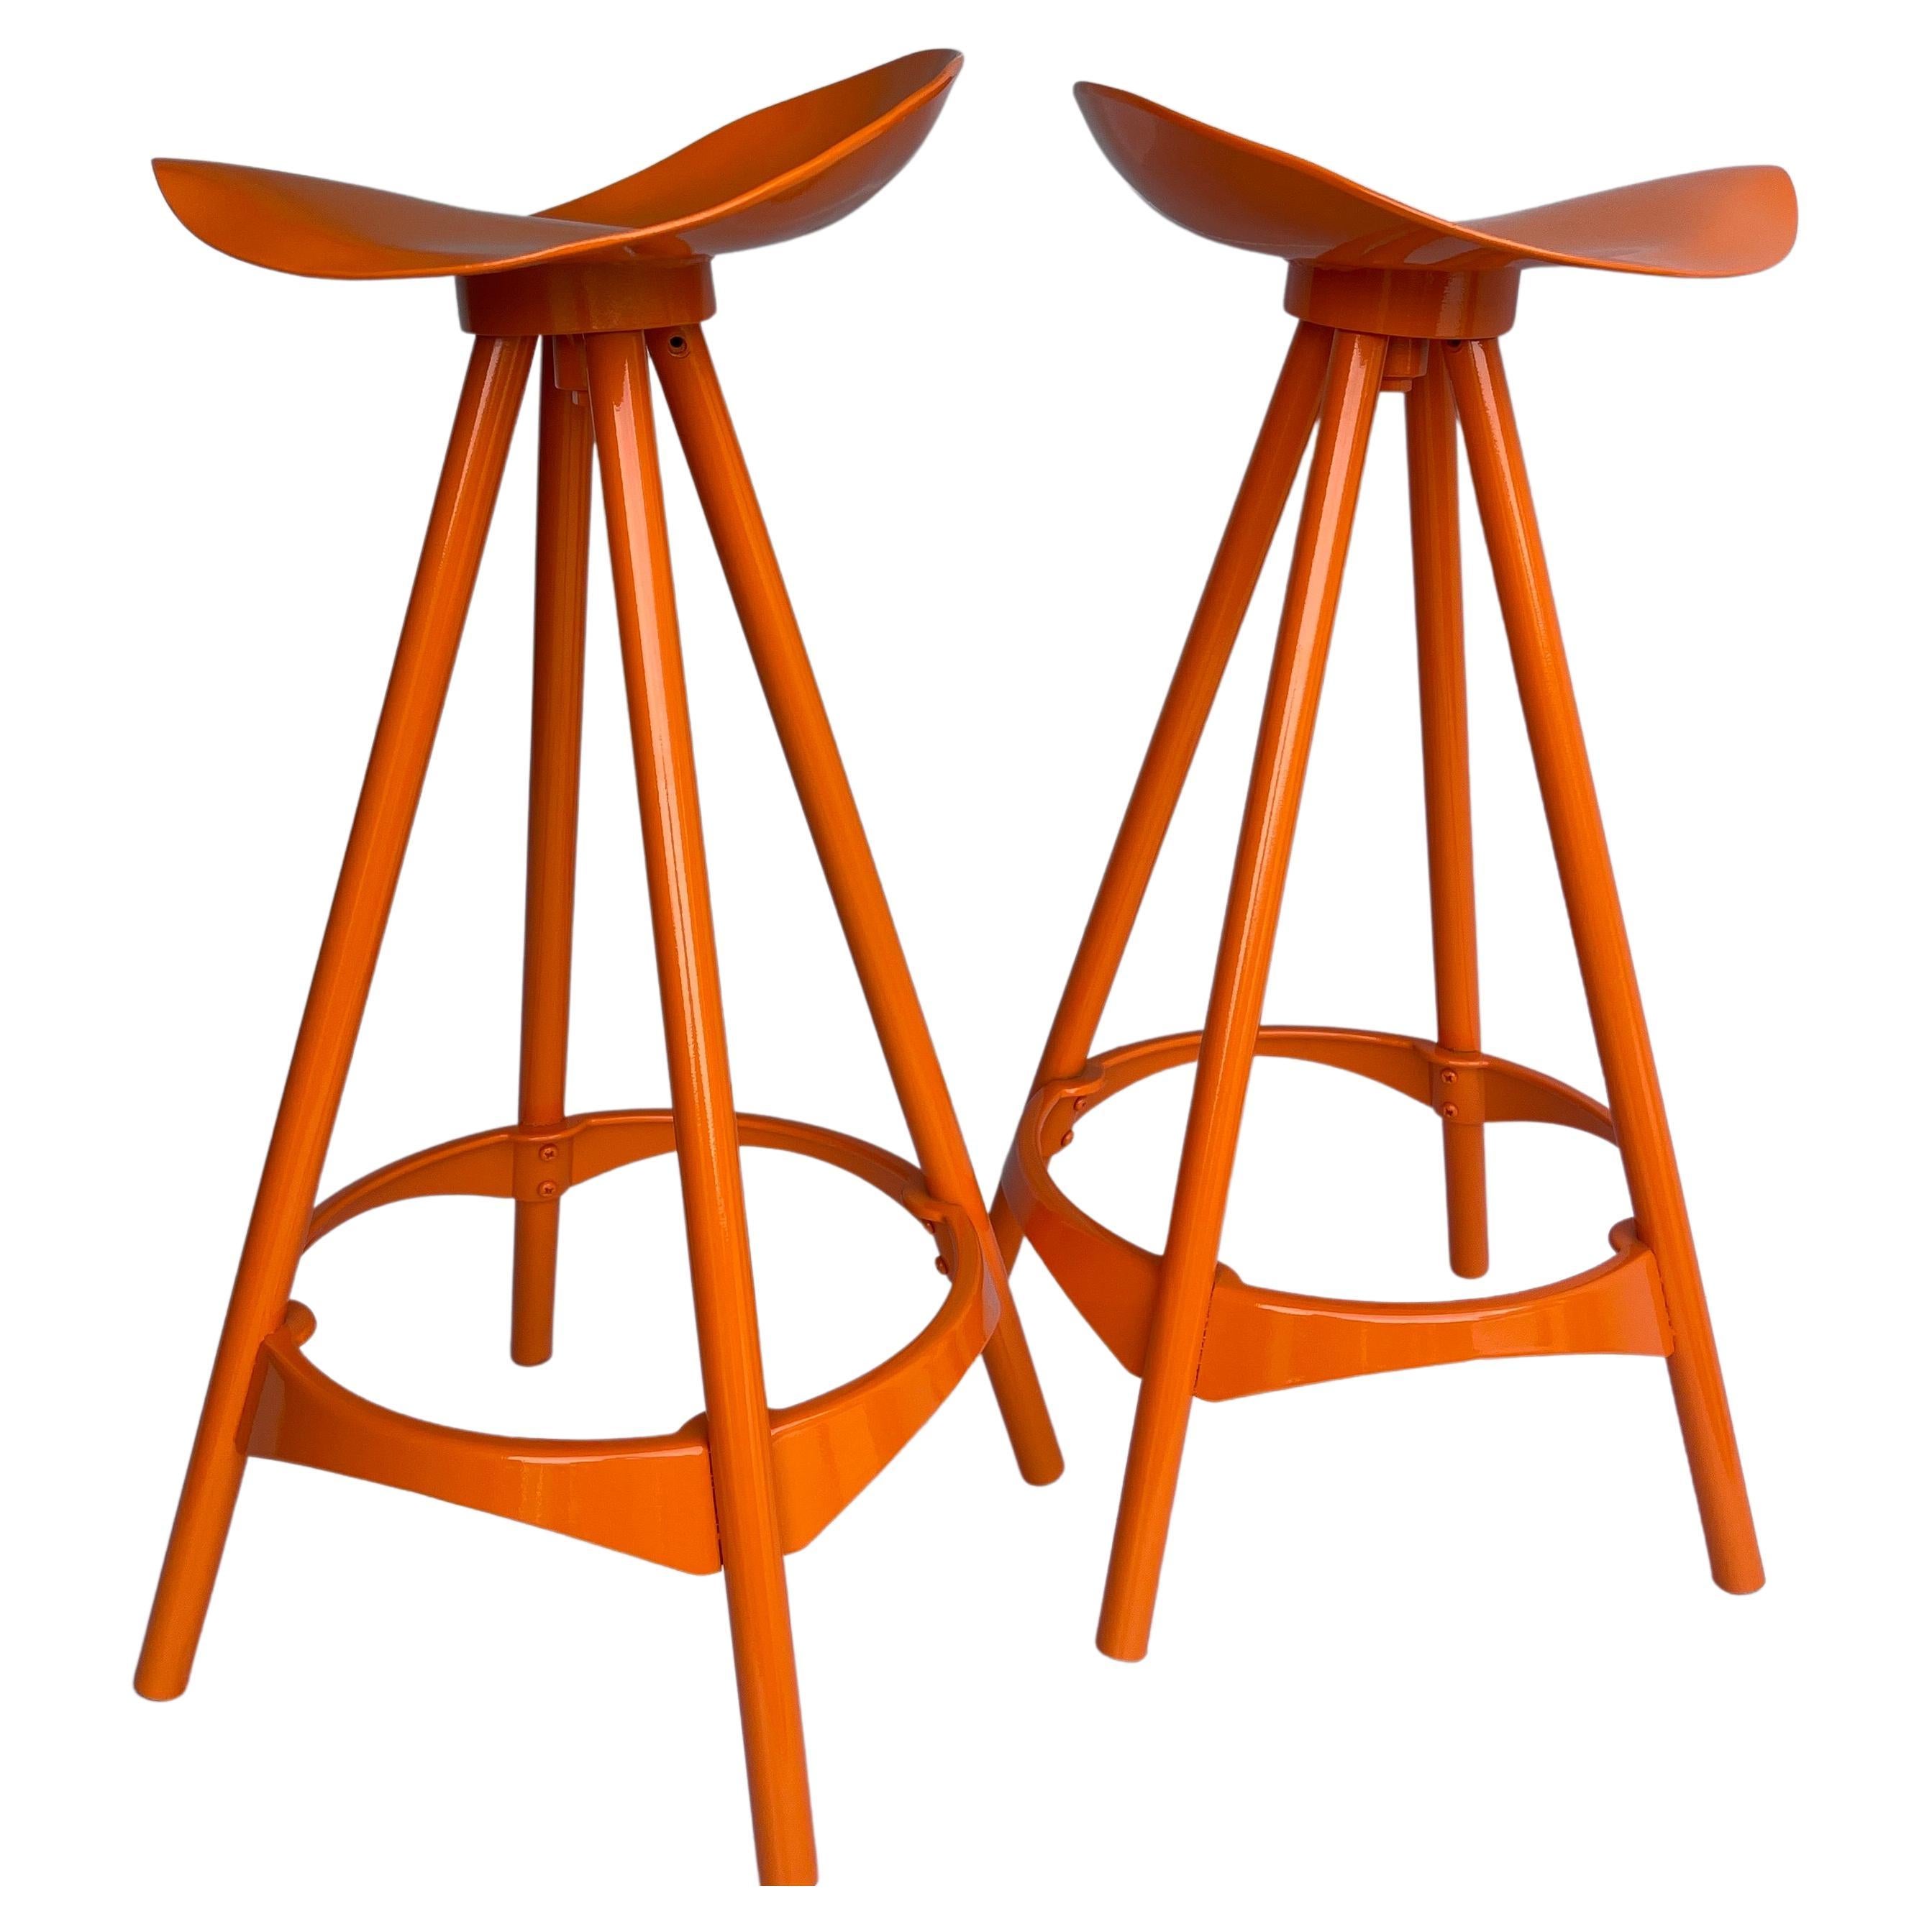 Pair Industrial Style Swivel Bar Stools, Powder-Coated Orange In Good Condition For Sale In Haddonfield, NJ